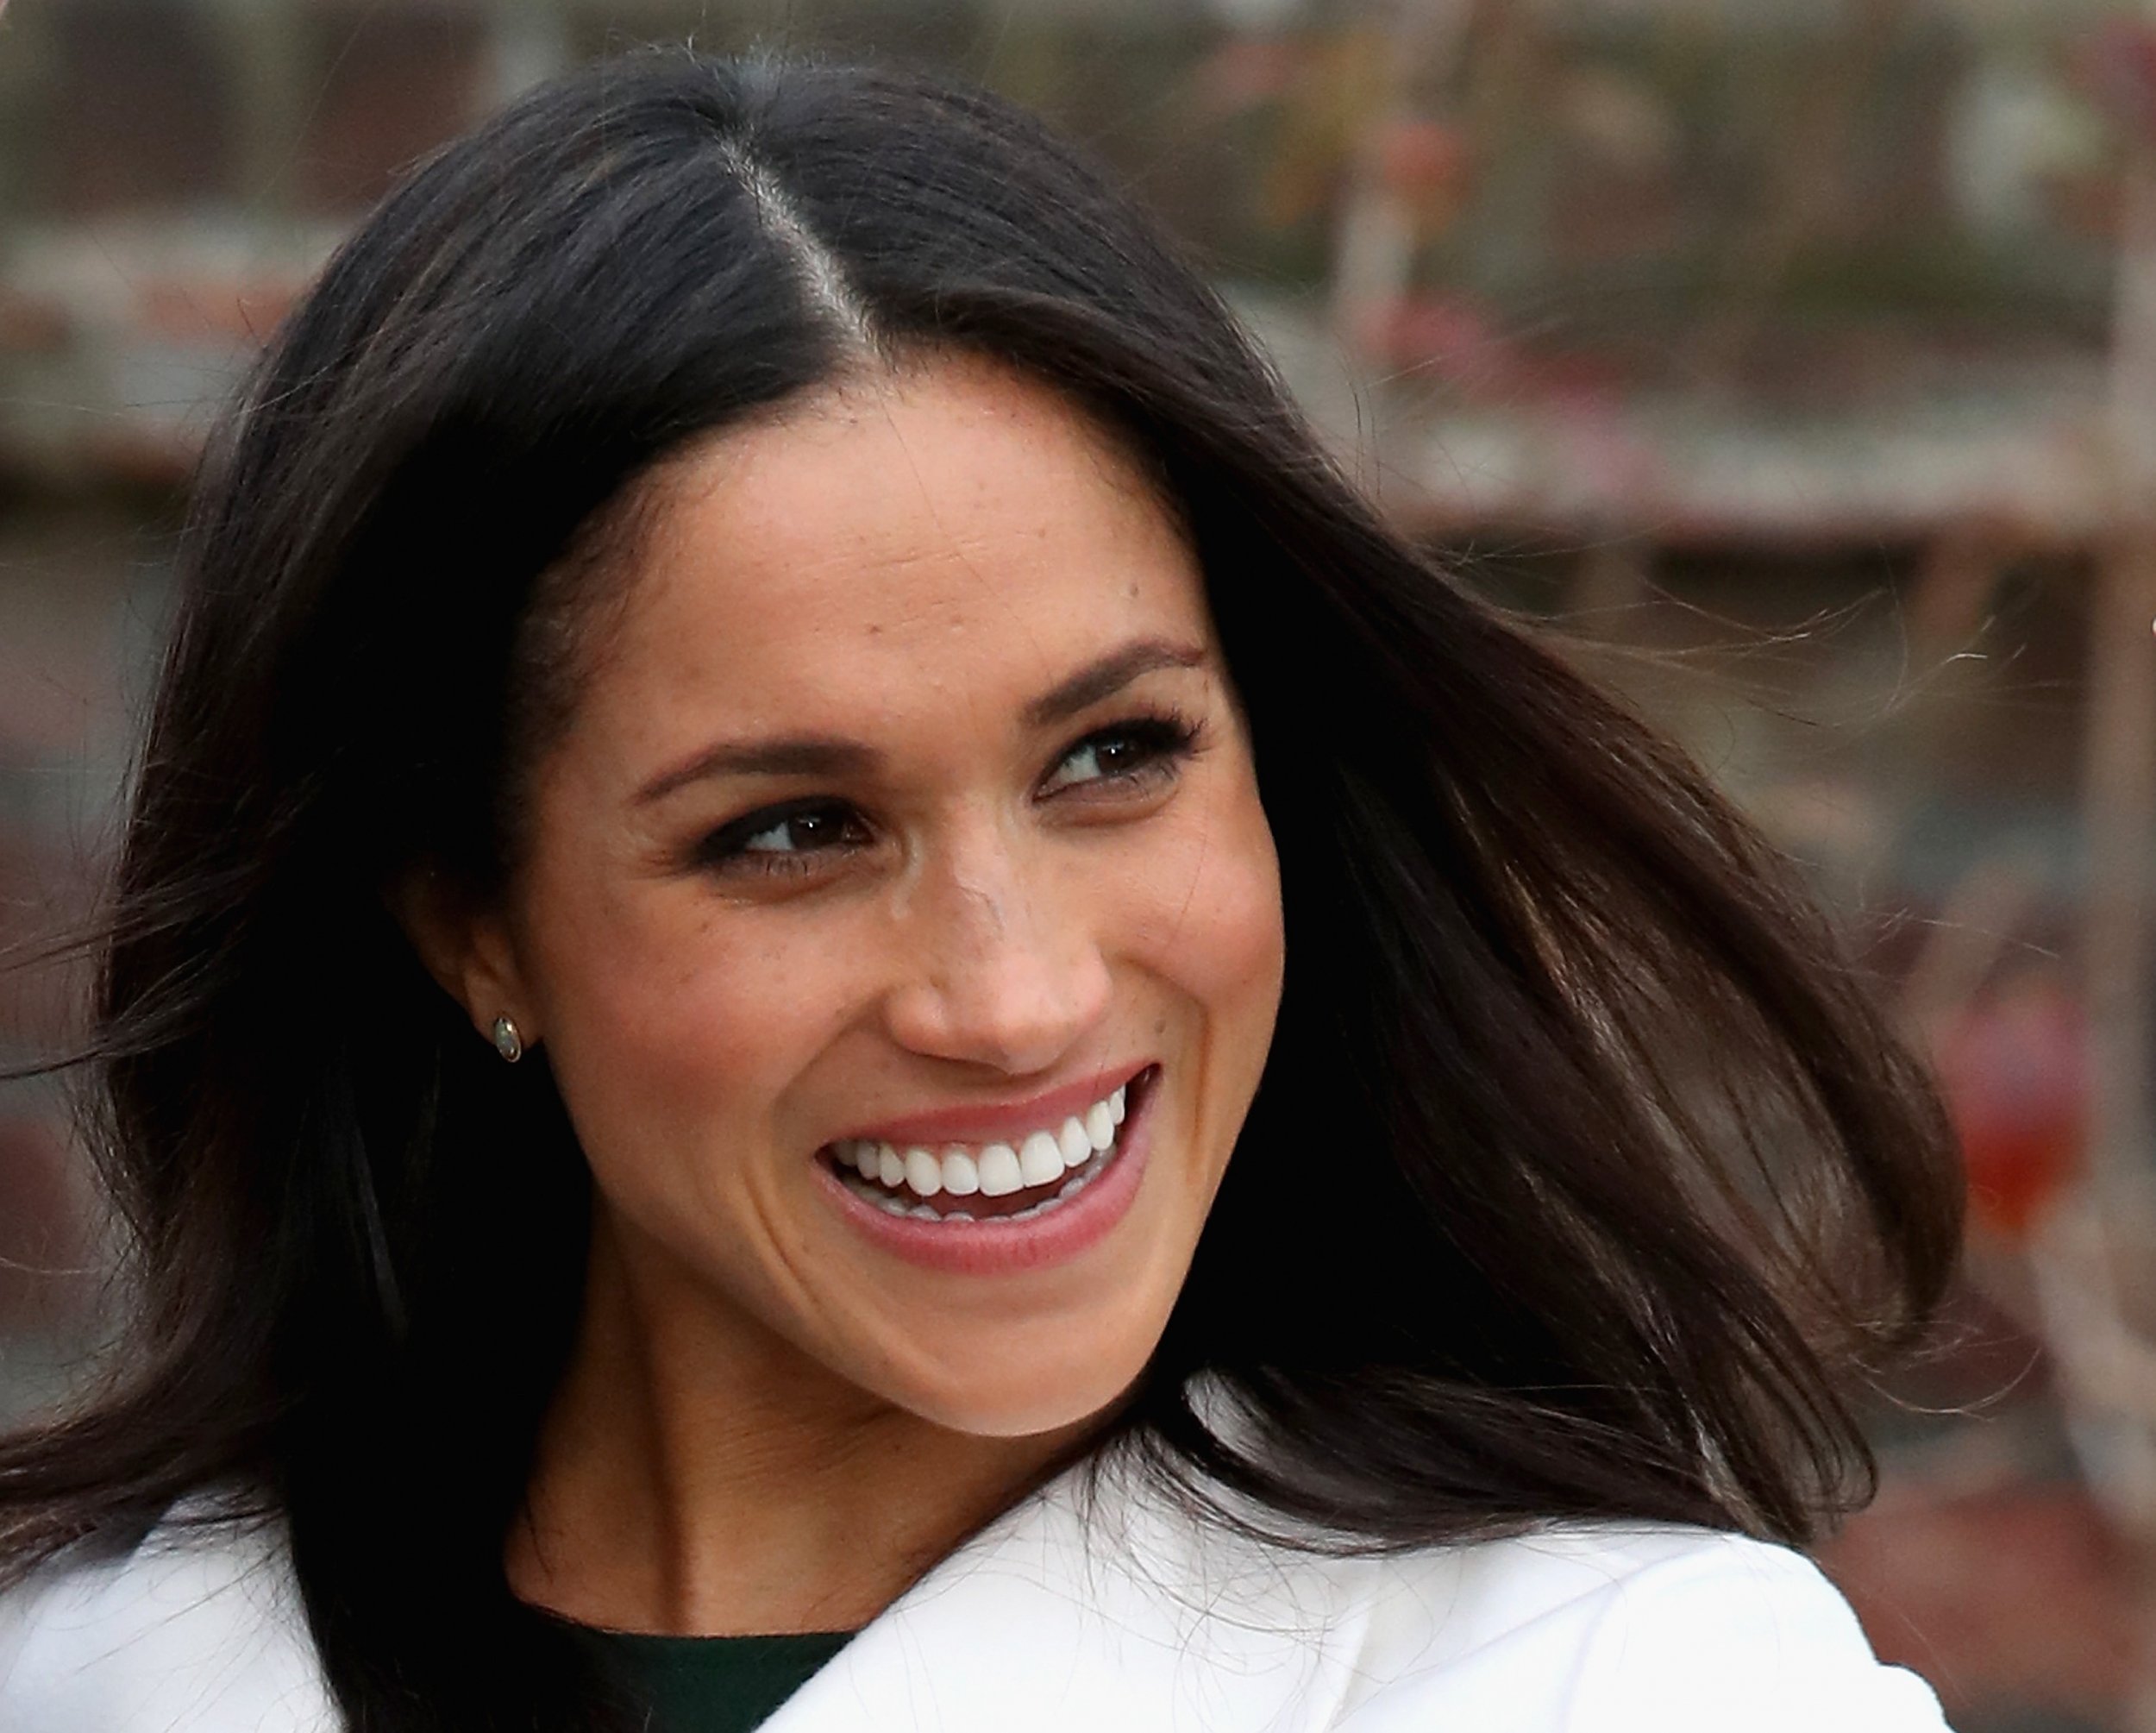 Meghan Markle is related to Shakespeare and Churchill